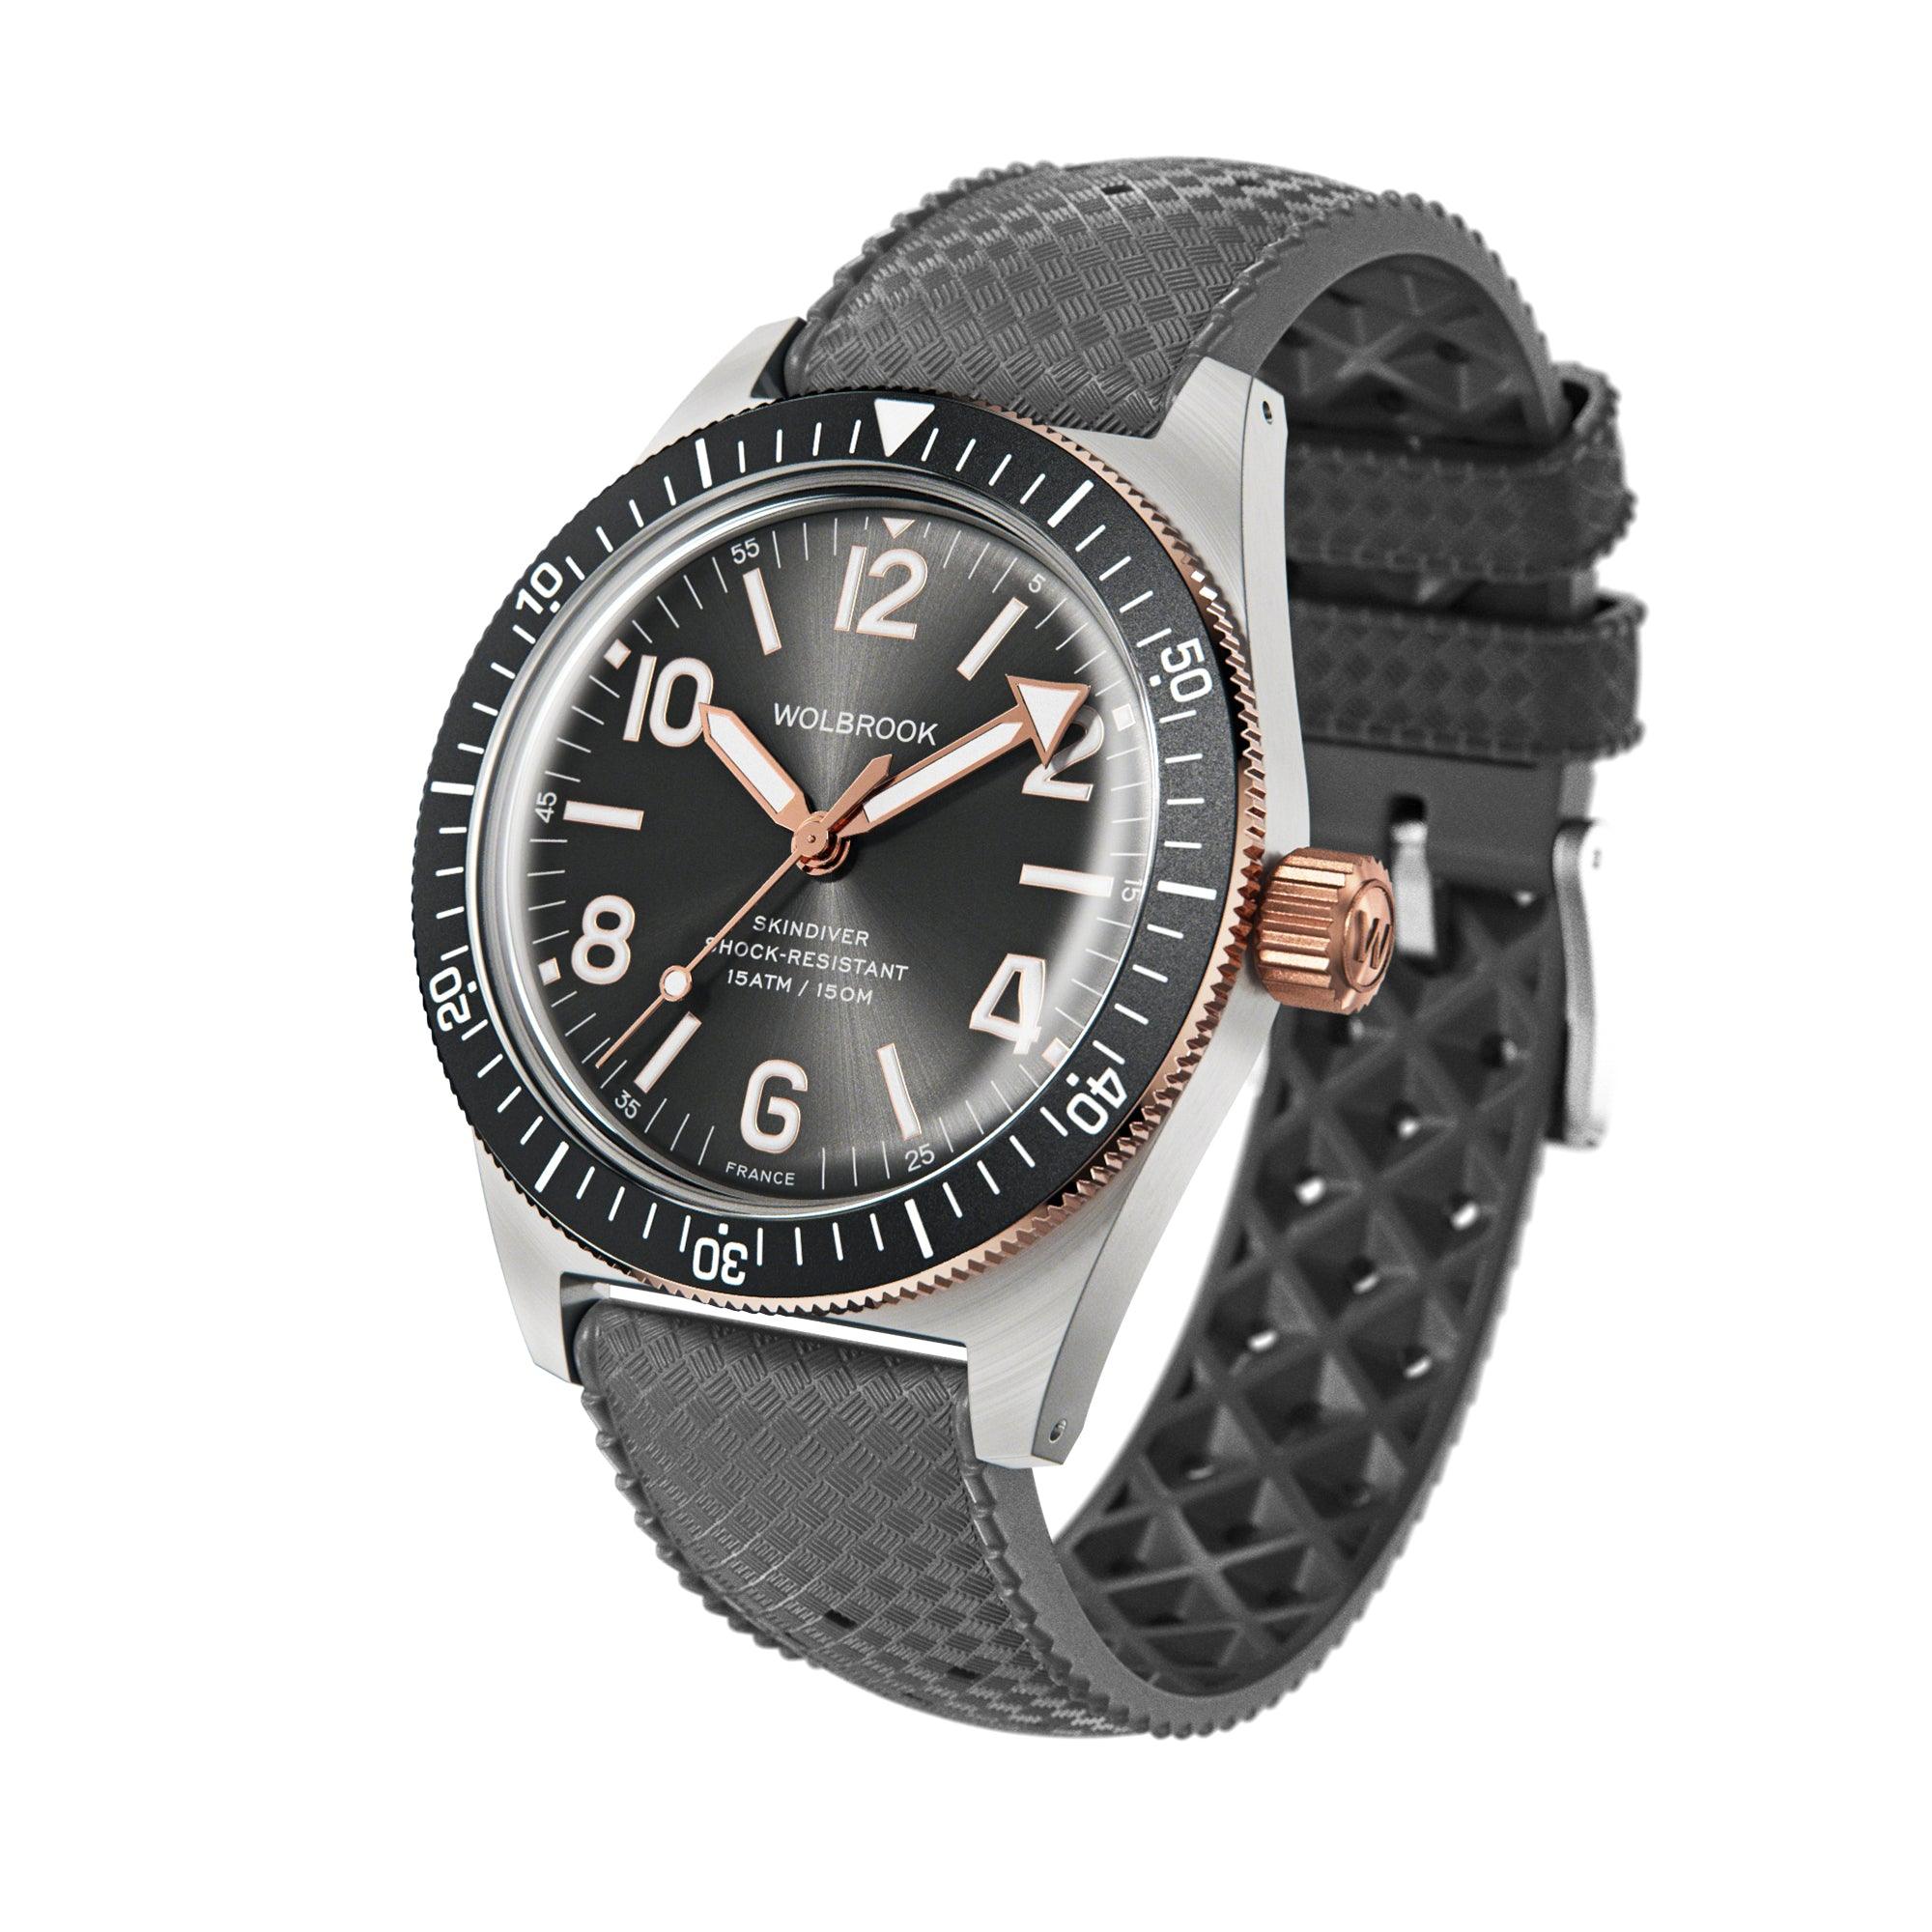 Skindiver Automatic Watch – Two-Tone Grey Sunray